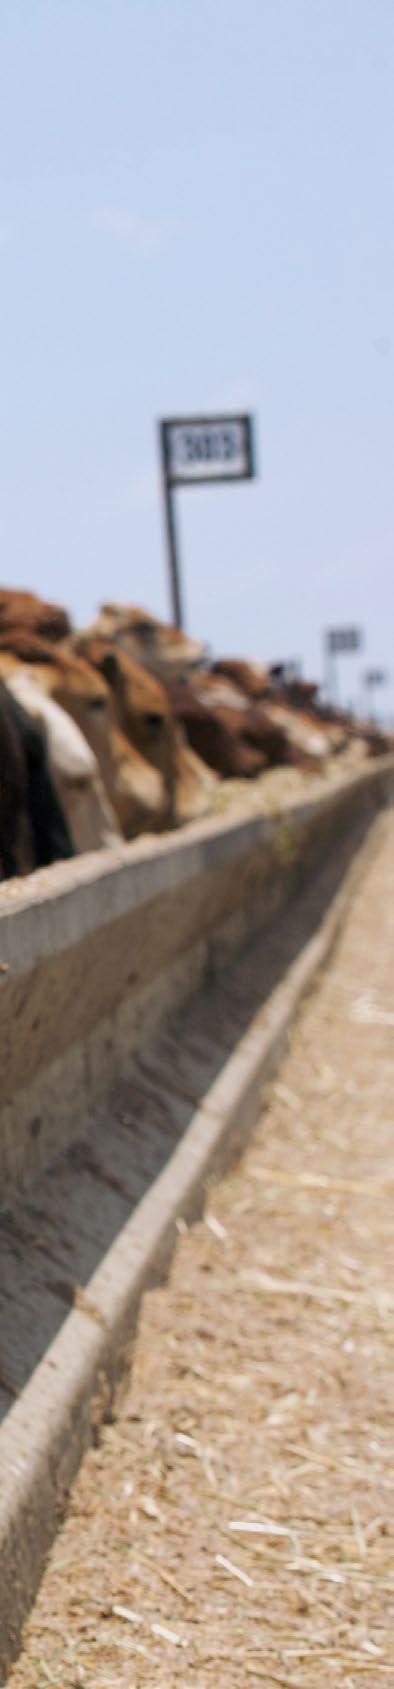 ON FARMS AND AT FEEDLOTS The Australian beef industry has a number of programs in place from the beginning of the supply chain to protect product integrity and ensure traceability and food safety.